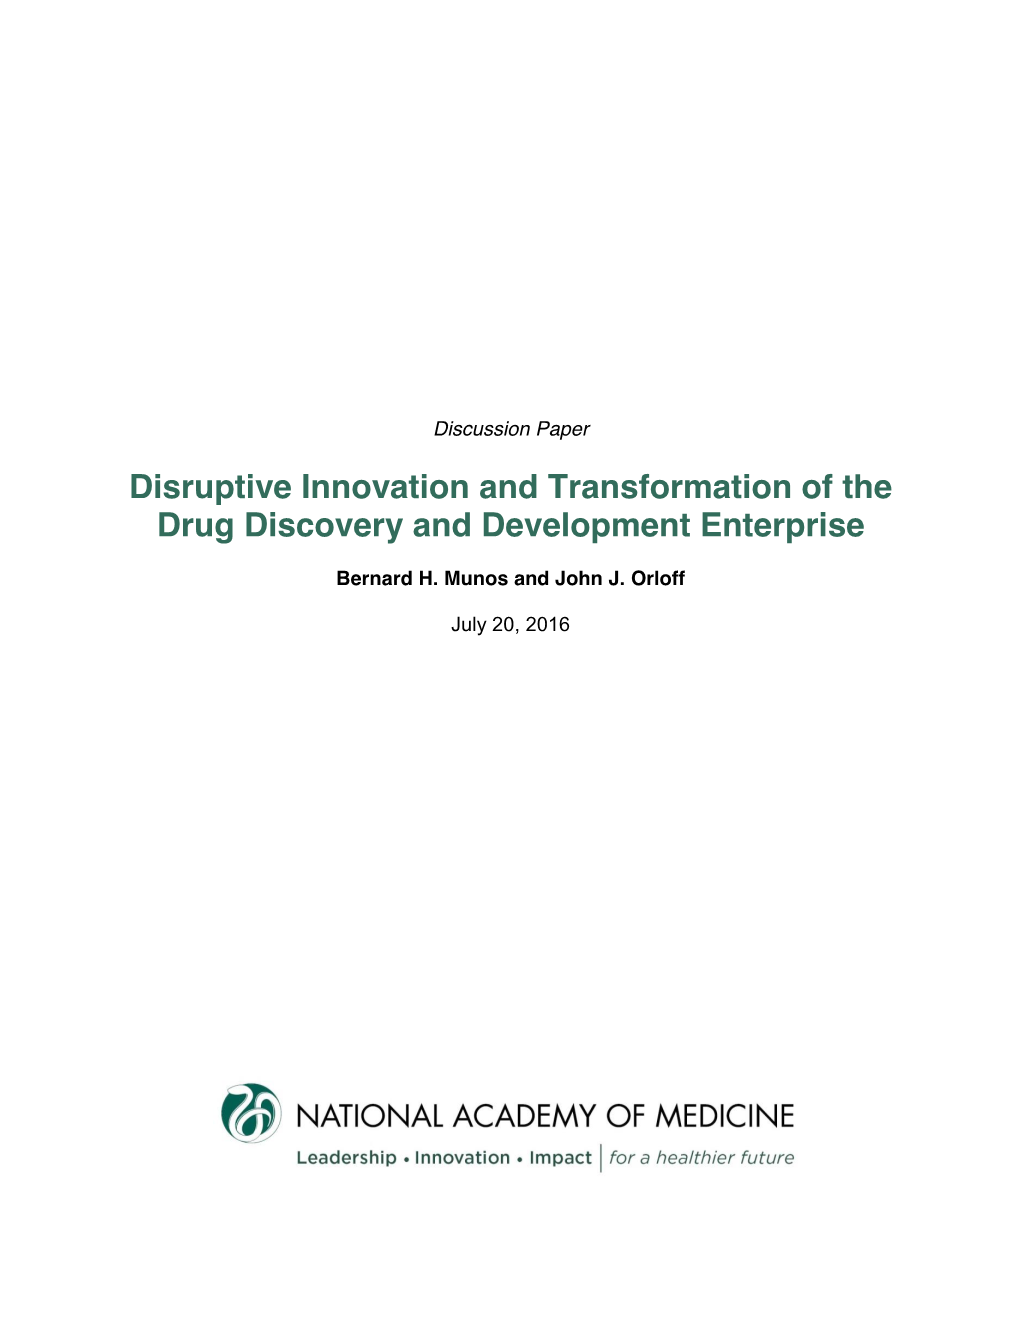 Disruptive Innovation and Transformation of the Drug Discovery and Development Enterprise